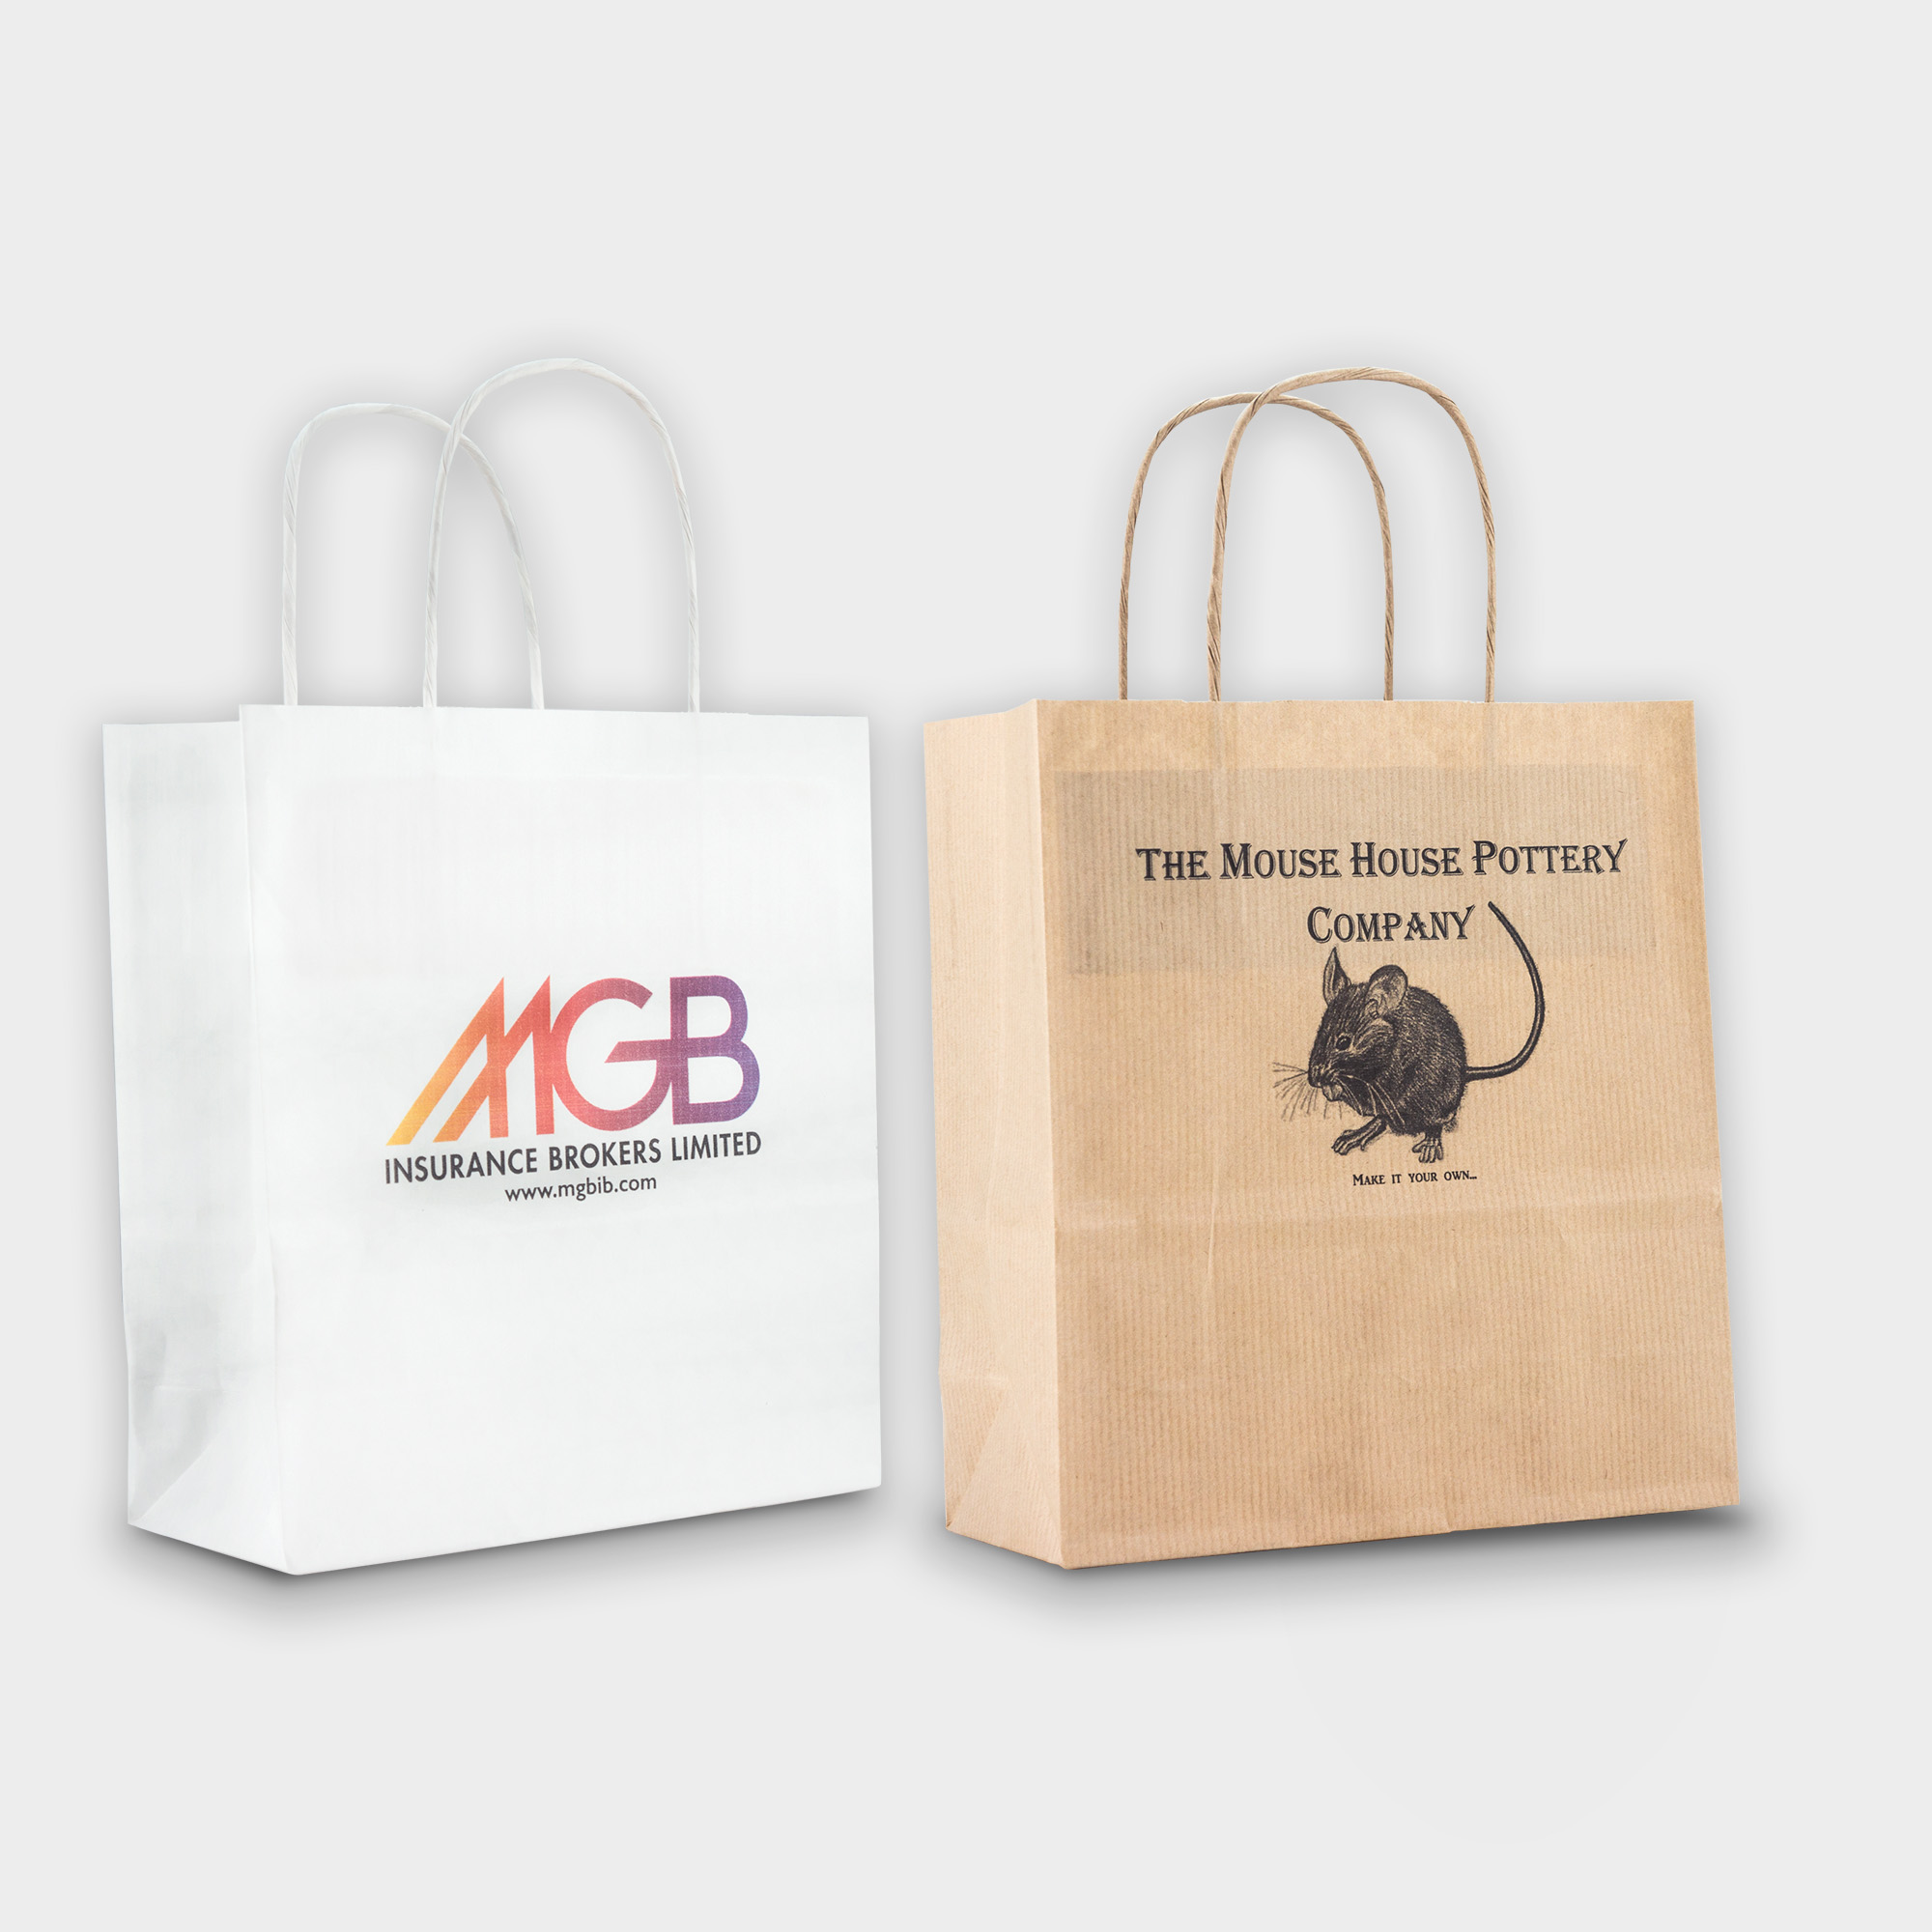 The Green & Good Mini Kraft Paper Bag is perfect for boutiques, parties, trade shows and more. Comes with twist handle and is available in either brown or white. These are pre-made paper carrier bags and we can offer digital overprinting in 1 colour print (Black only) or 4 colour print to either 1 side or both.